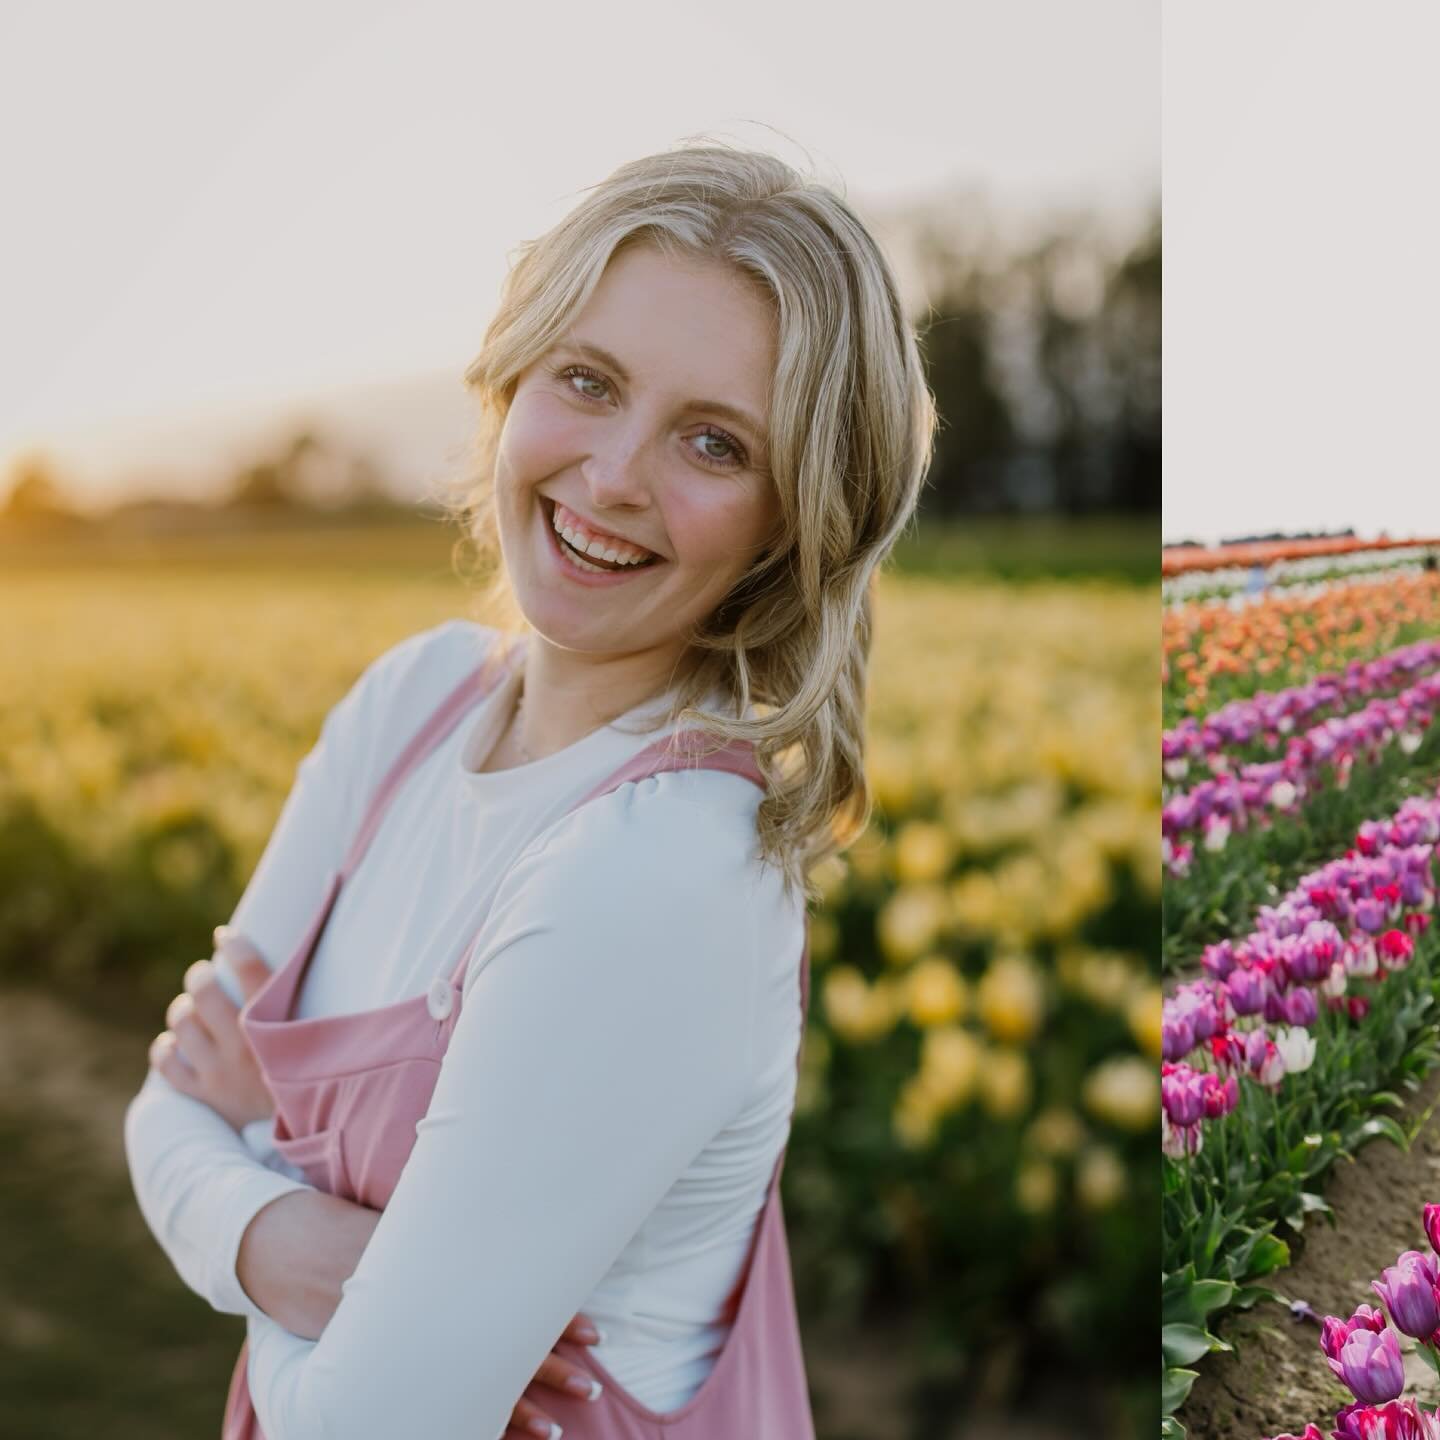 There&rsquo;s magic in the air as we welcome a vibrant soul from Eastern Oregon to the picturesque Tulip Fields! 🌷 As the sun begins its descent, we embark on an evening of whimsy, laughter, and the art of freezing moments in time.
📸 With each clic